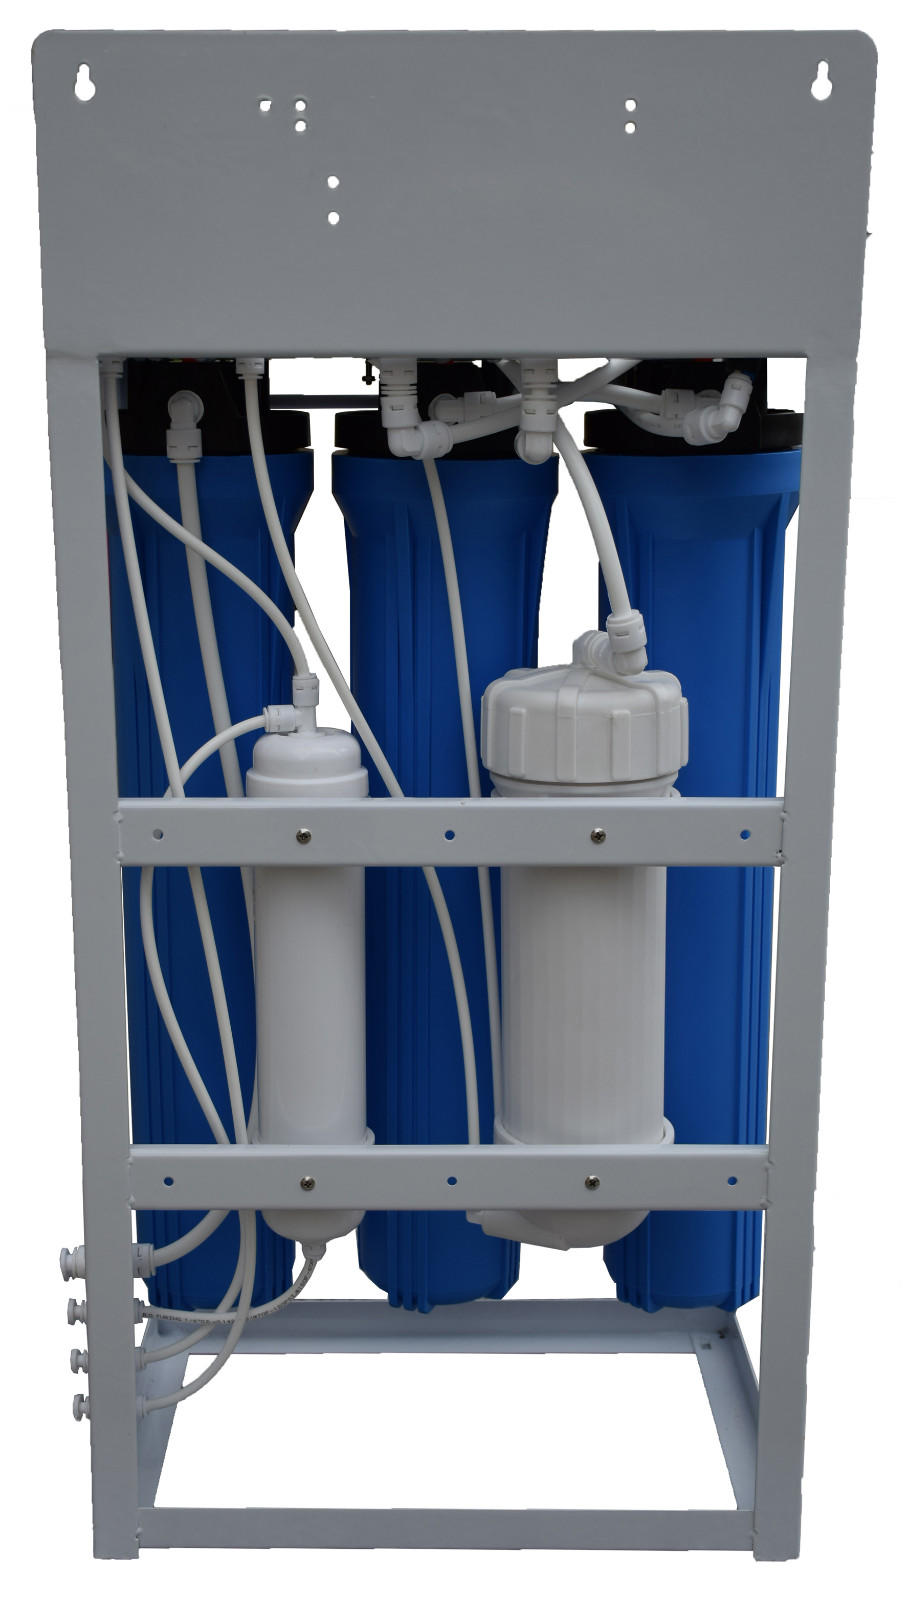 professional well water sediment filter design for household